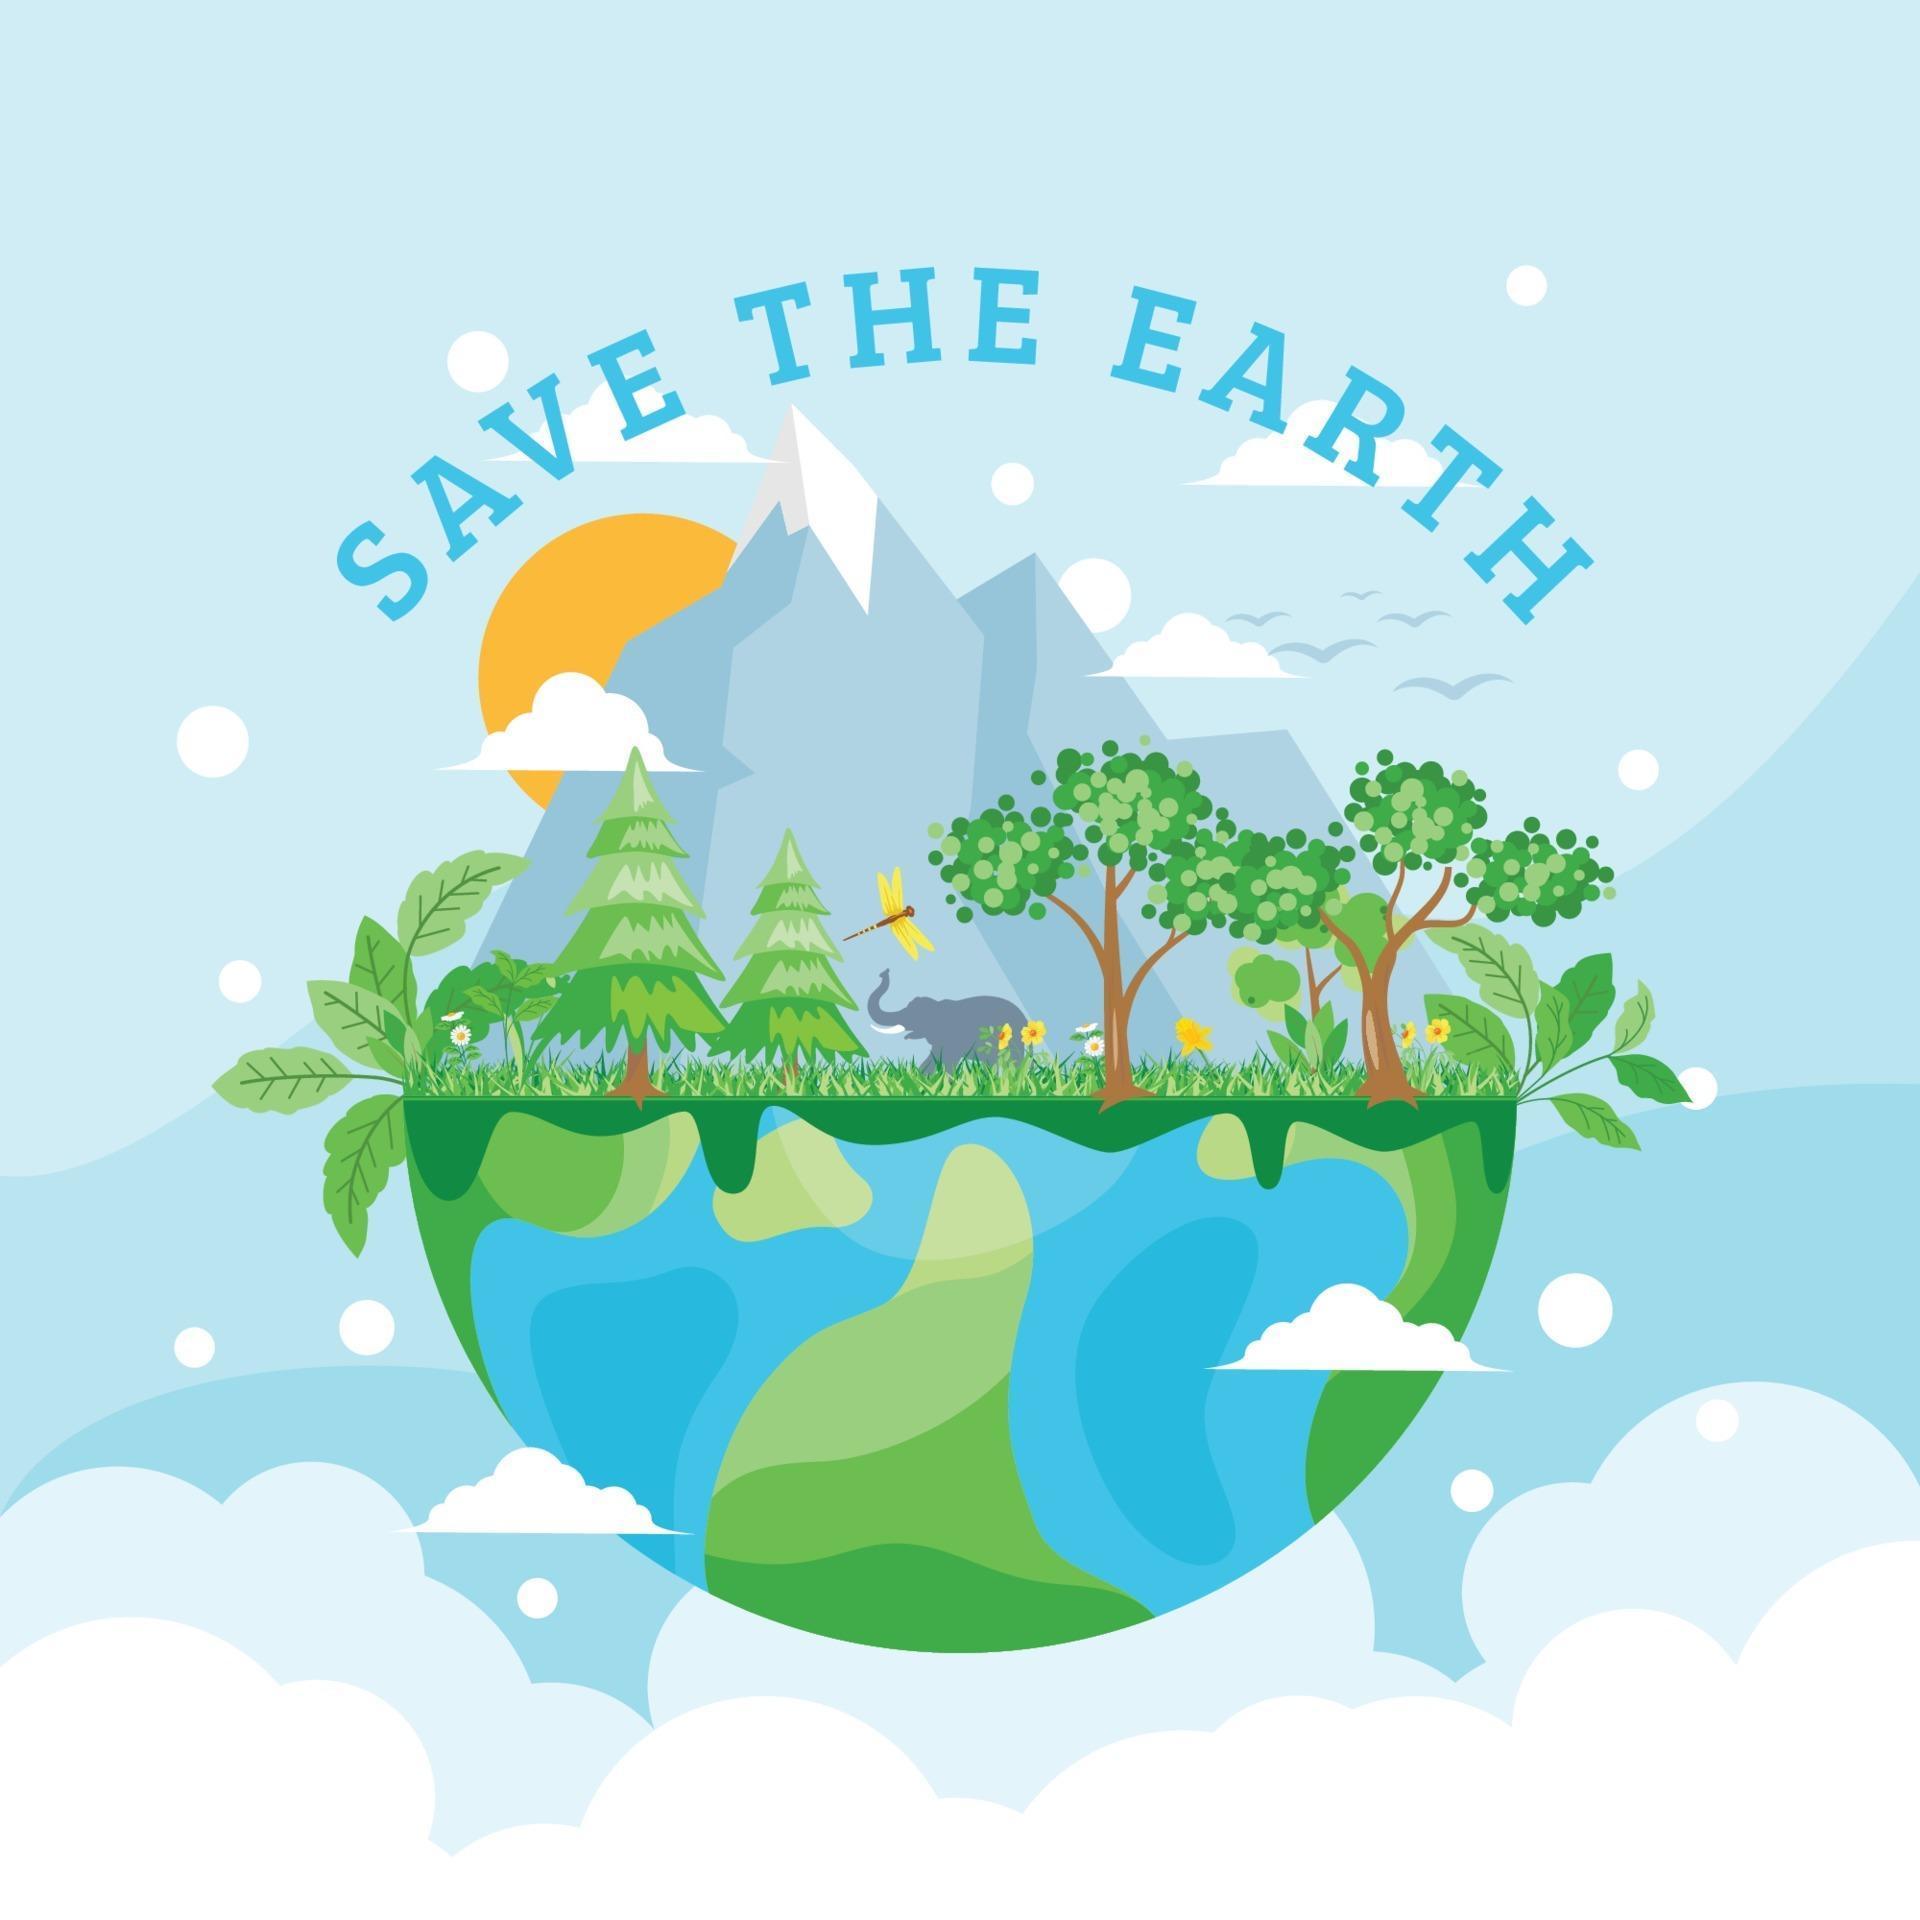 Saving our planet - Saving our planet